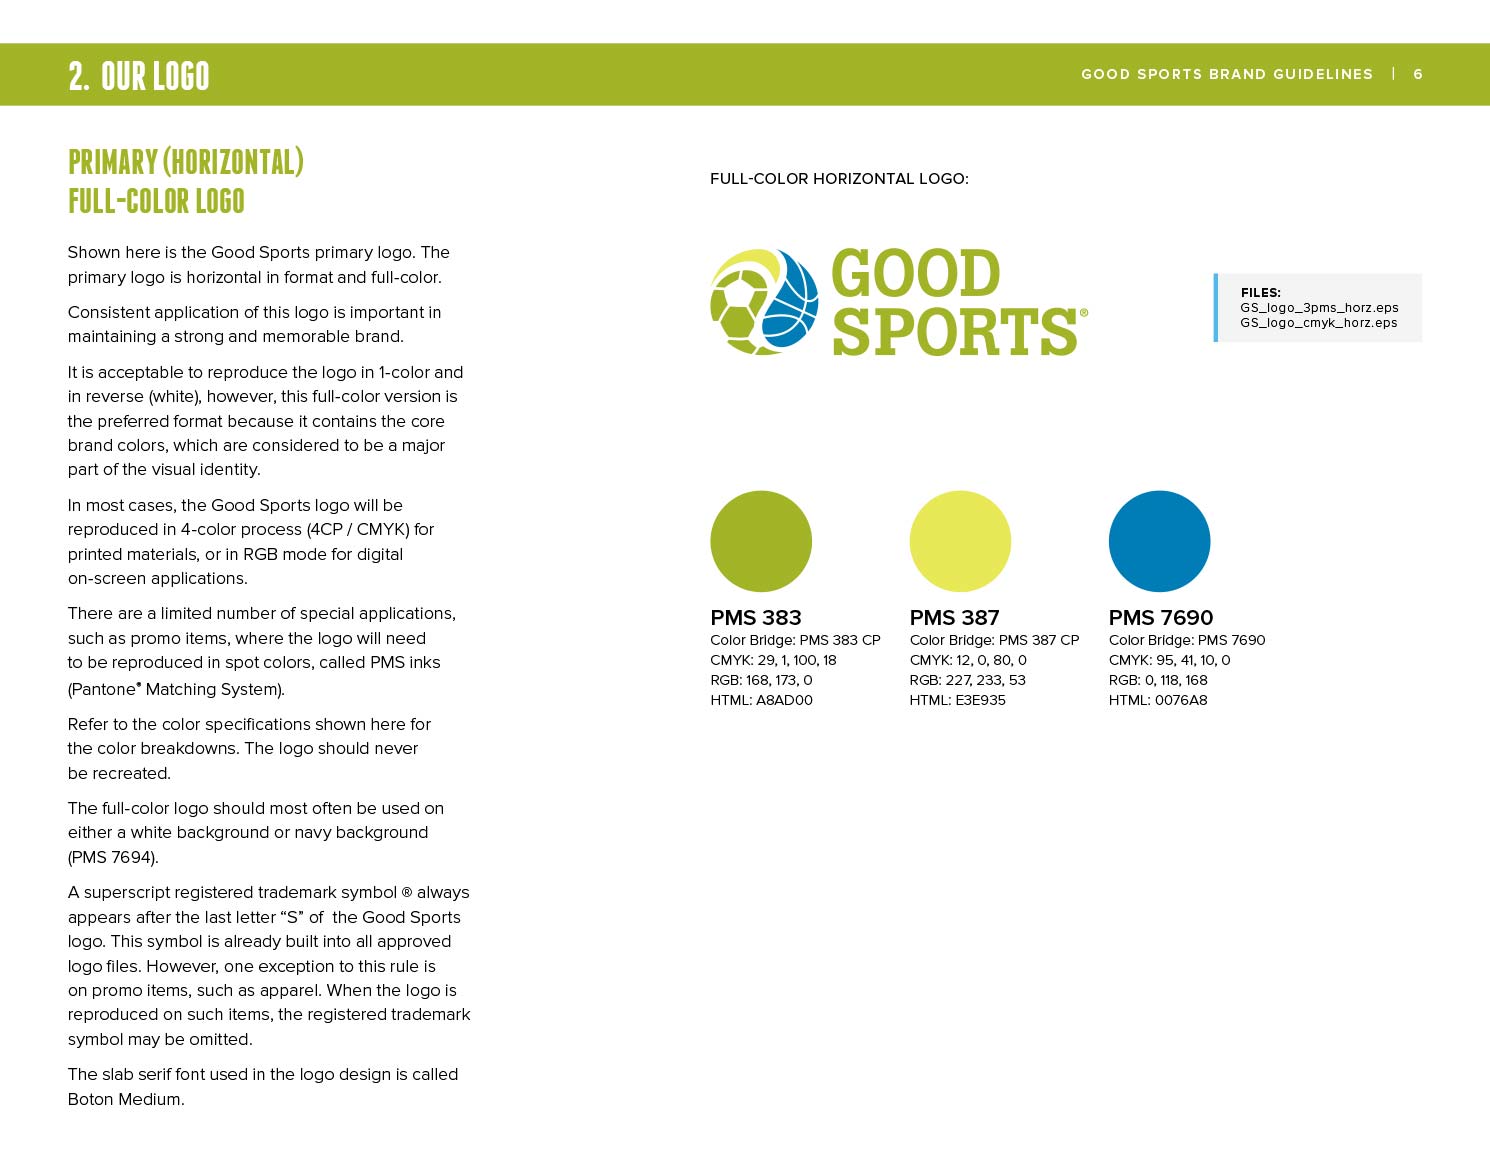 Good Sports Brand Guide showing primary logo